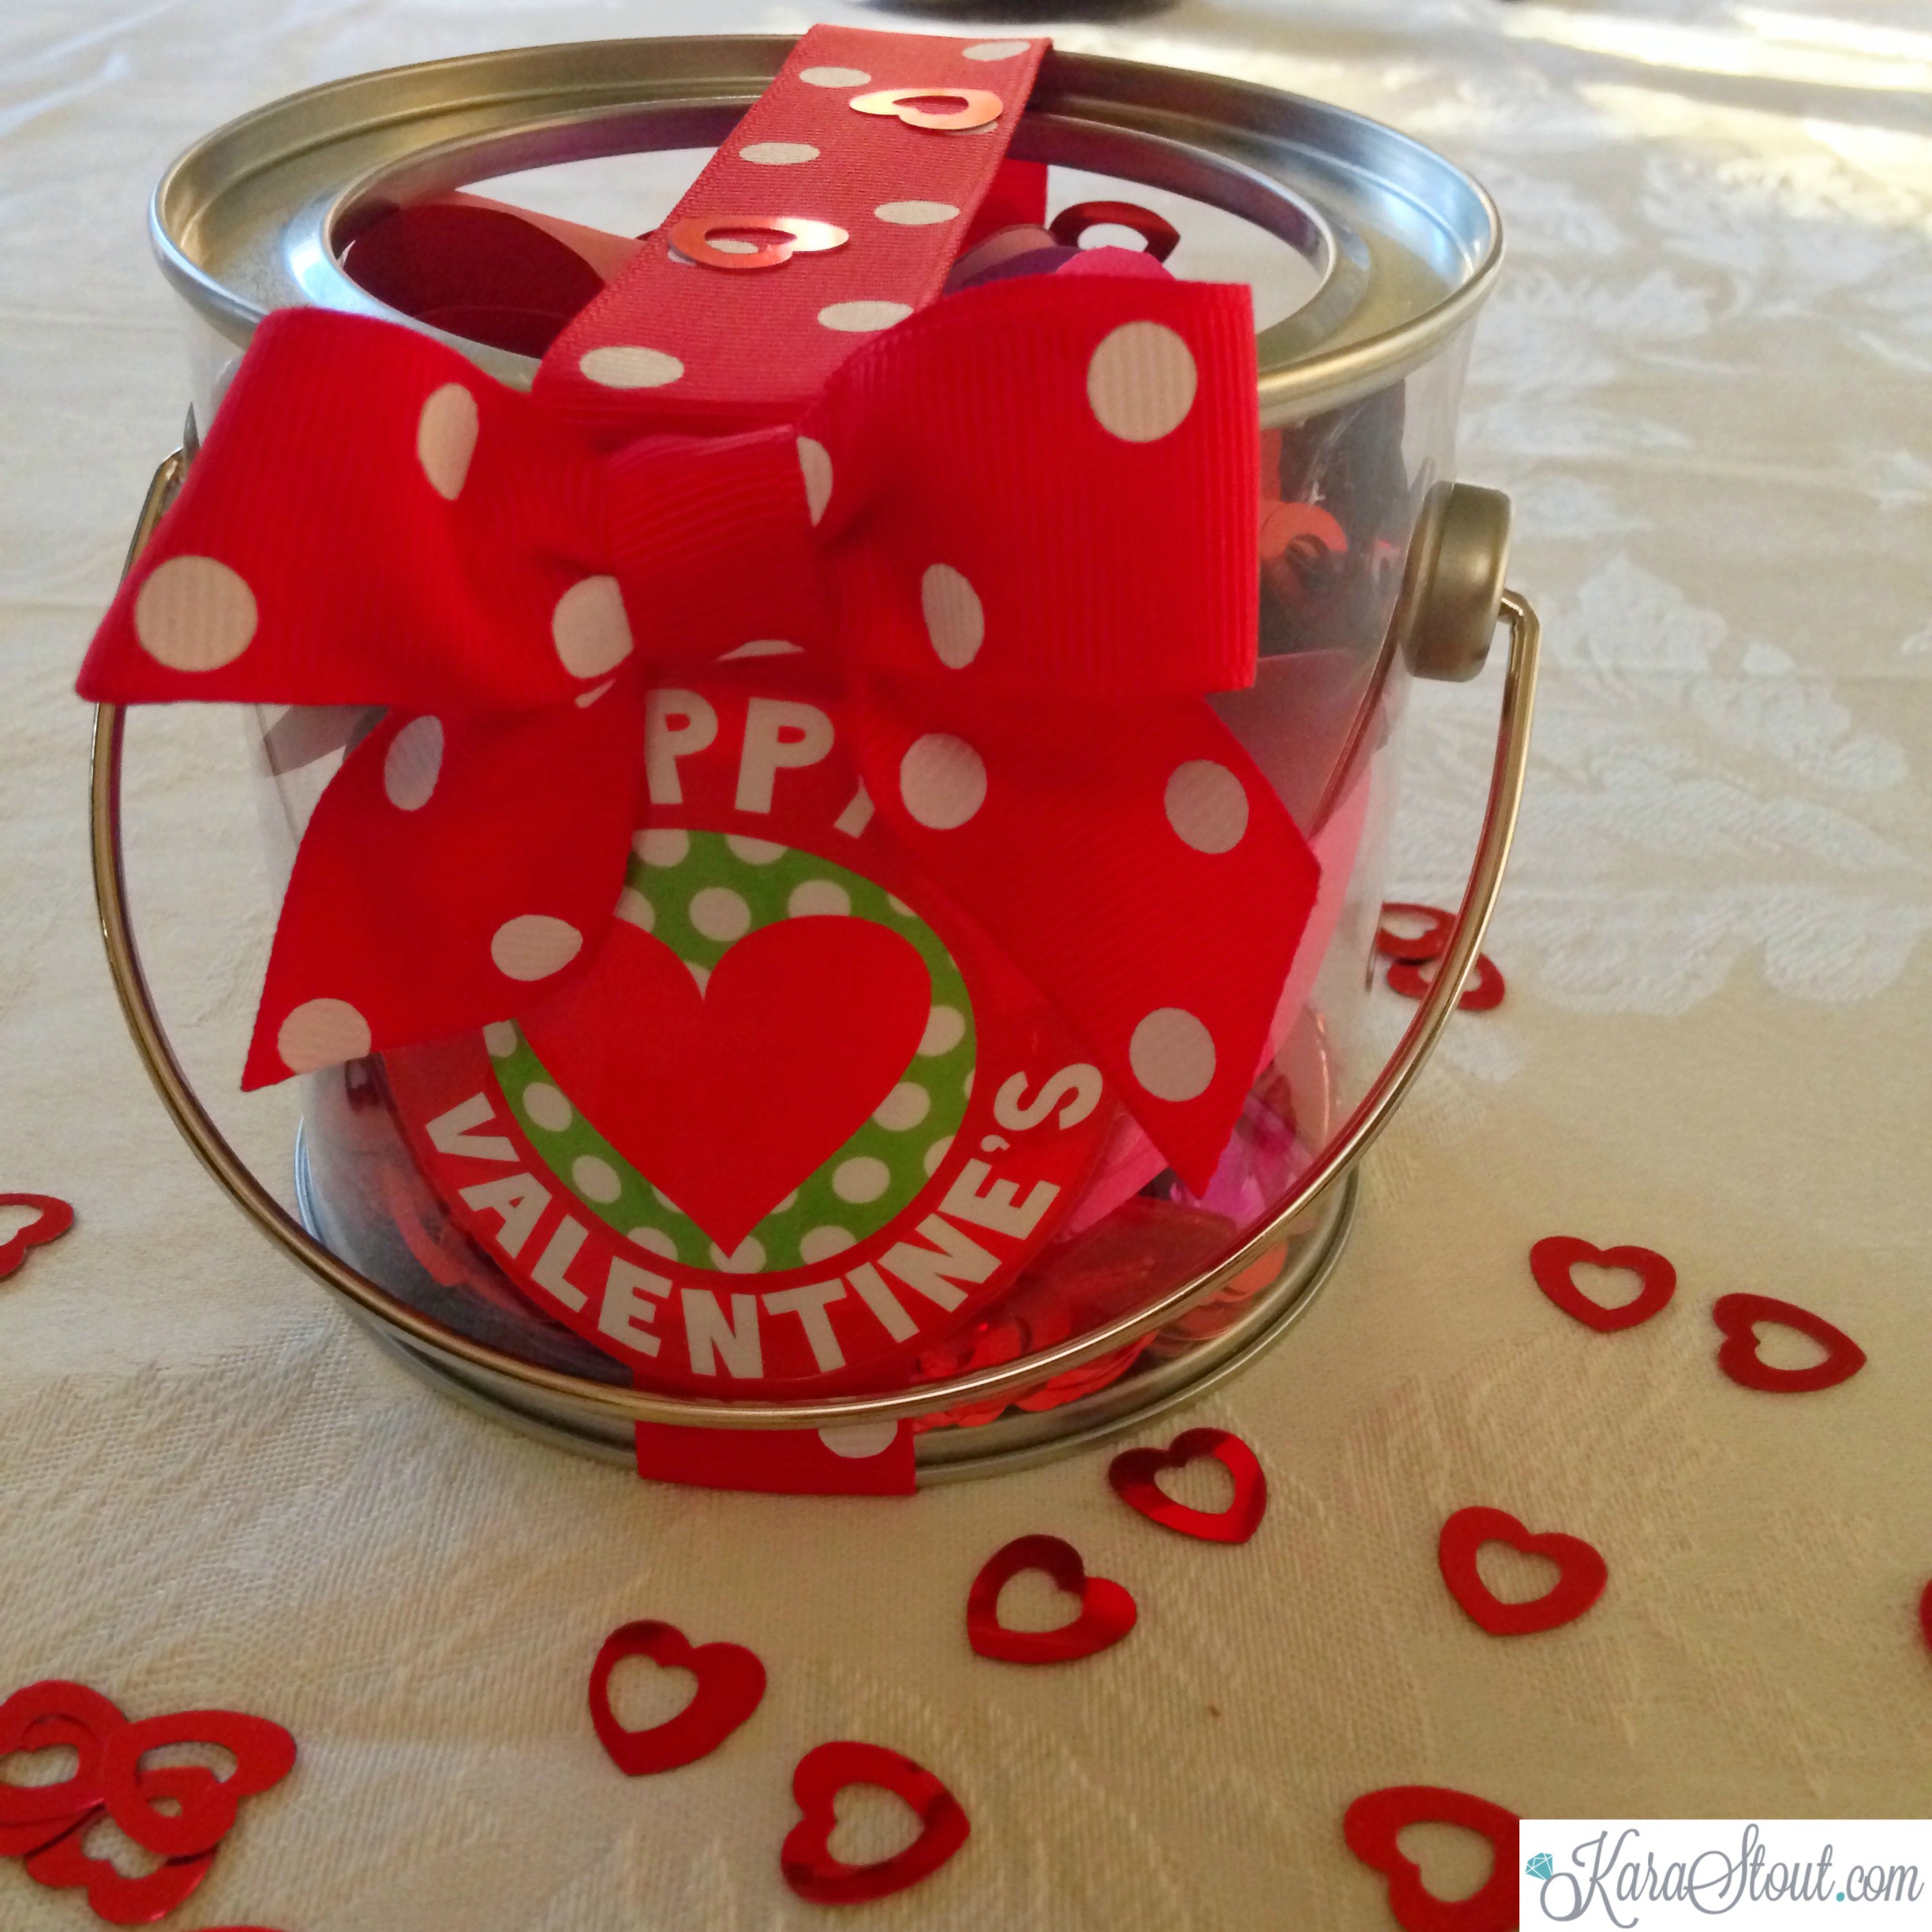 Why I Love You Jar: A Valentine’s Day DIY Gift